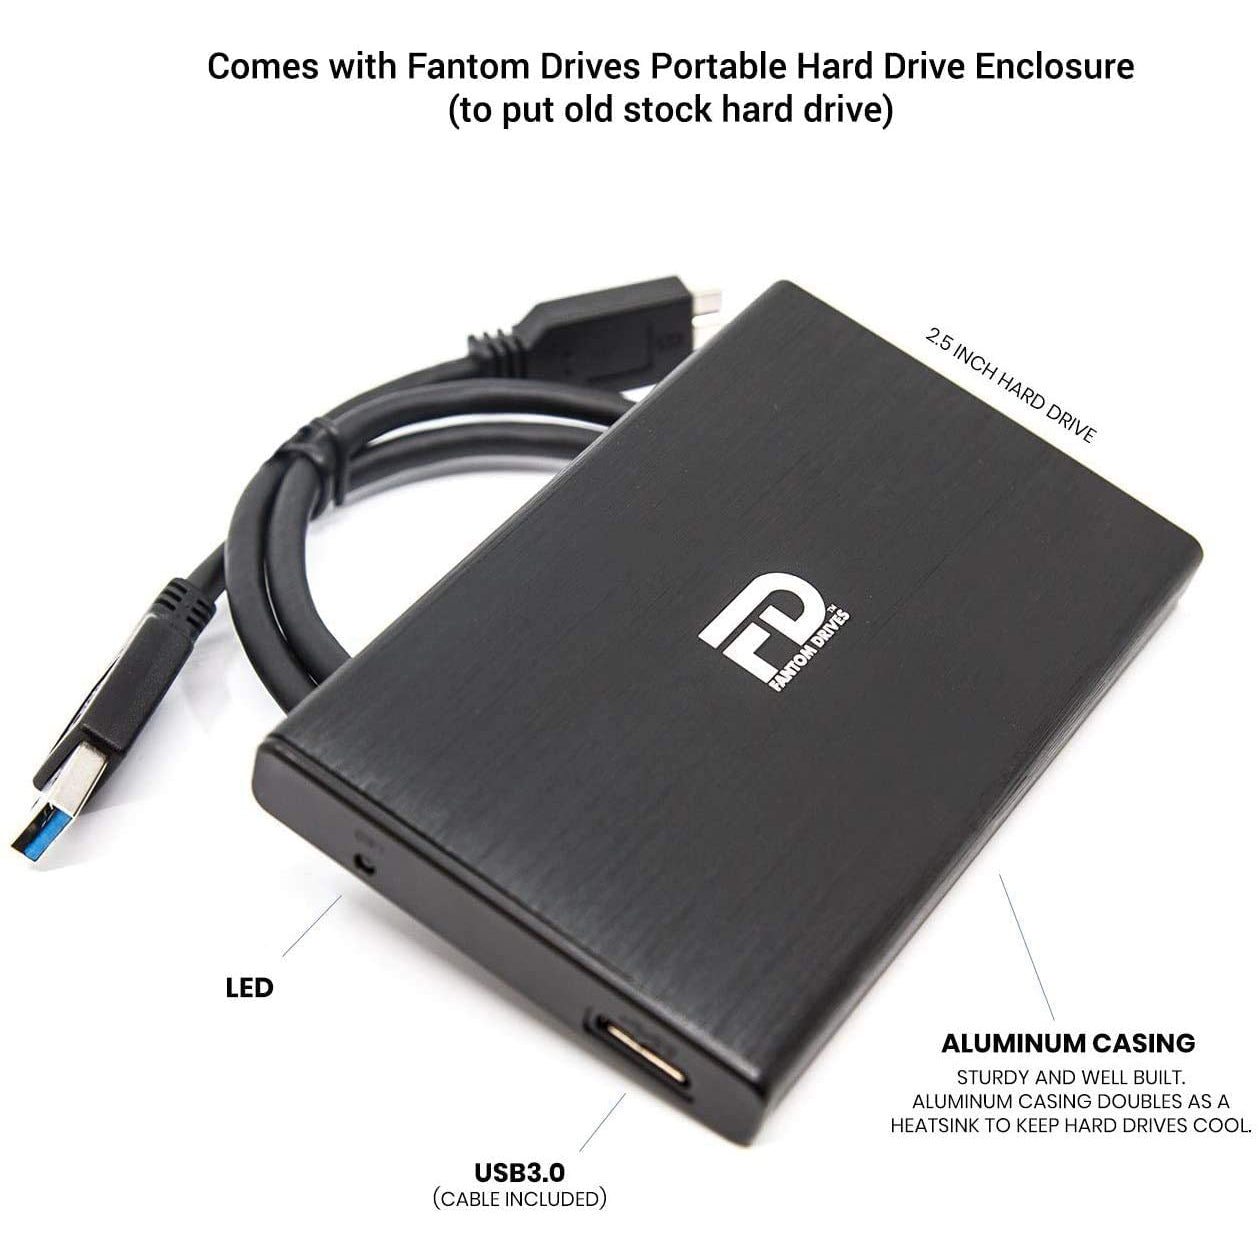  Fantom Drives PS4-1TB-KIT 1TB 7200RPM Hard Drive Upgrade Kit  for Sony PlayStation 4, PS4 Slim, and PS4 Pro : Electronics